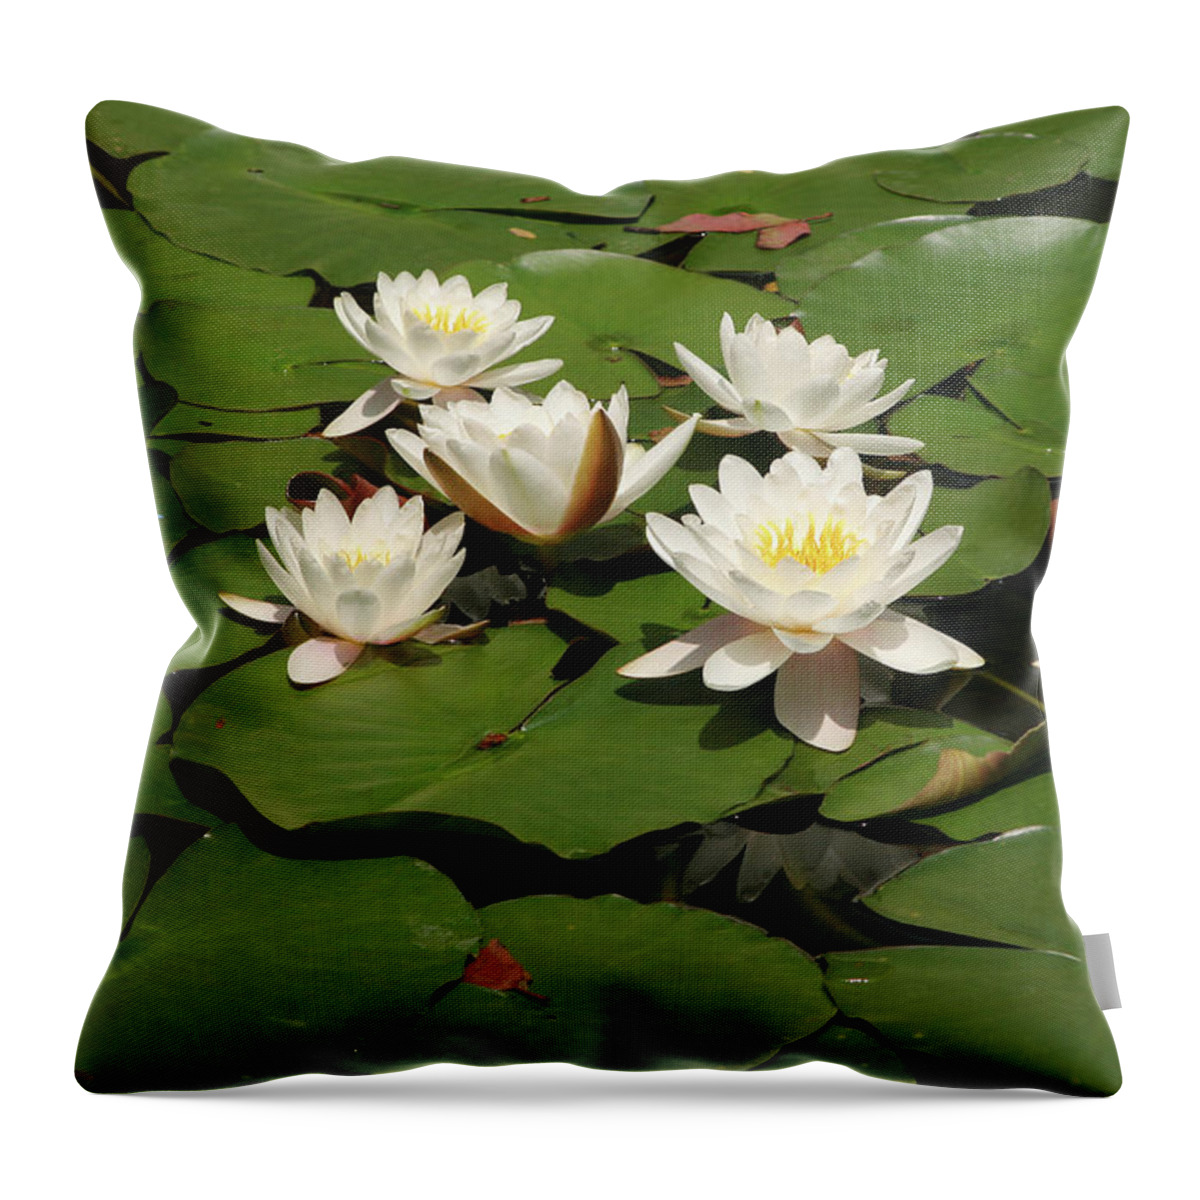 Water Lilies Throw Pillow featuring the photograph White Water Lilies by Art Block Collections